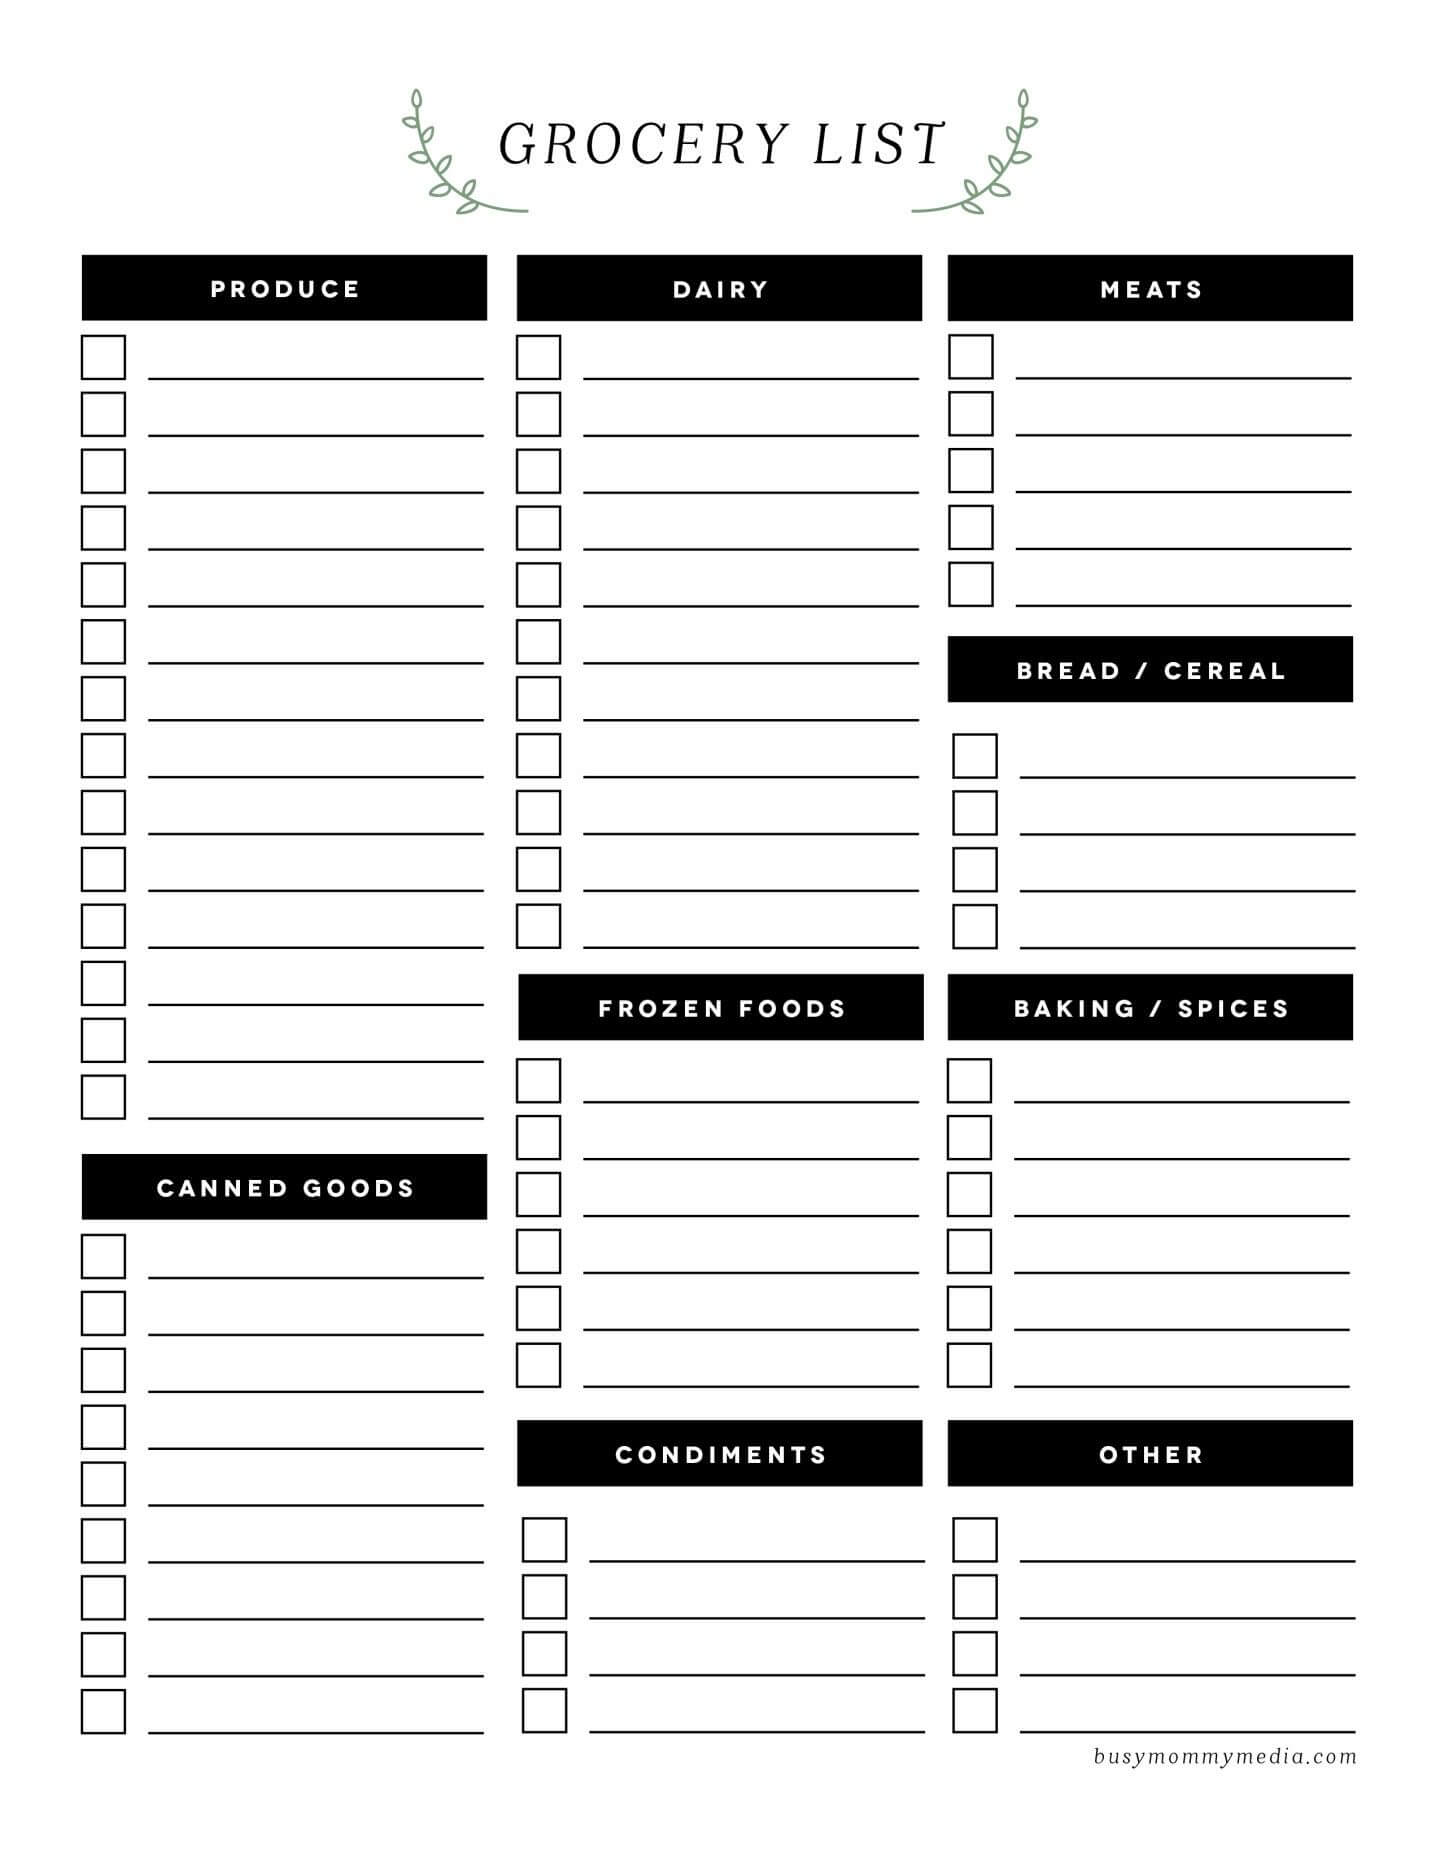 Grocery Shopping List Printable | Ellipsis With Regard To Blank Grocery Shopping List Template